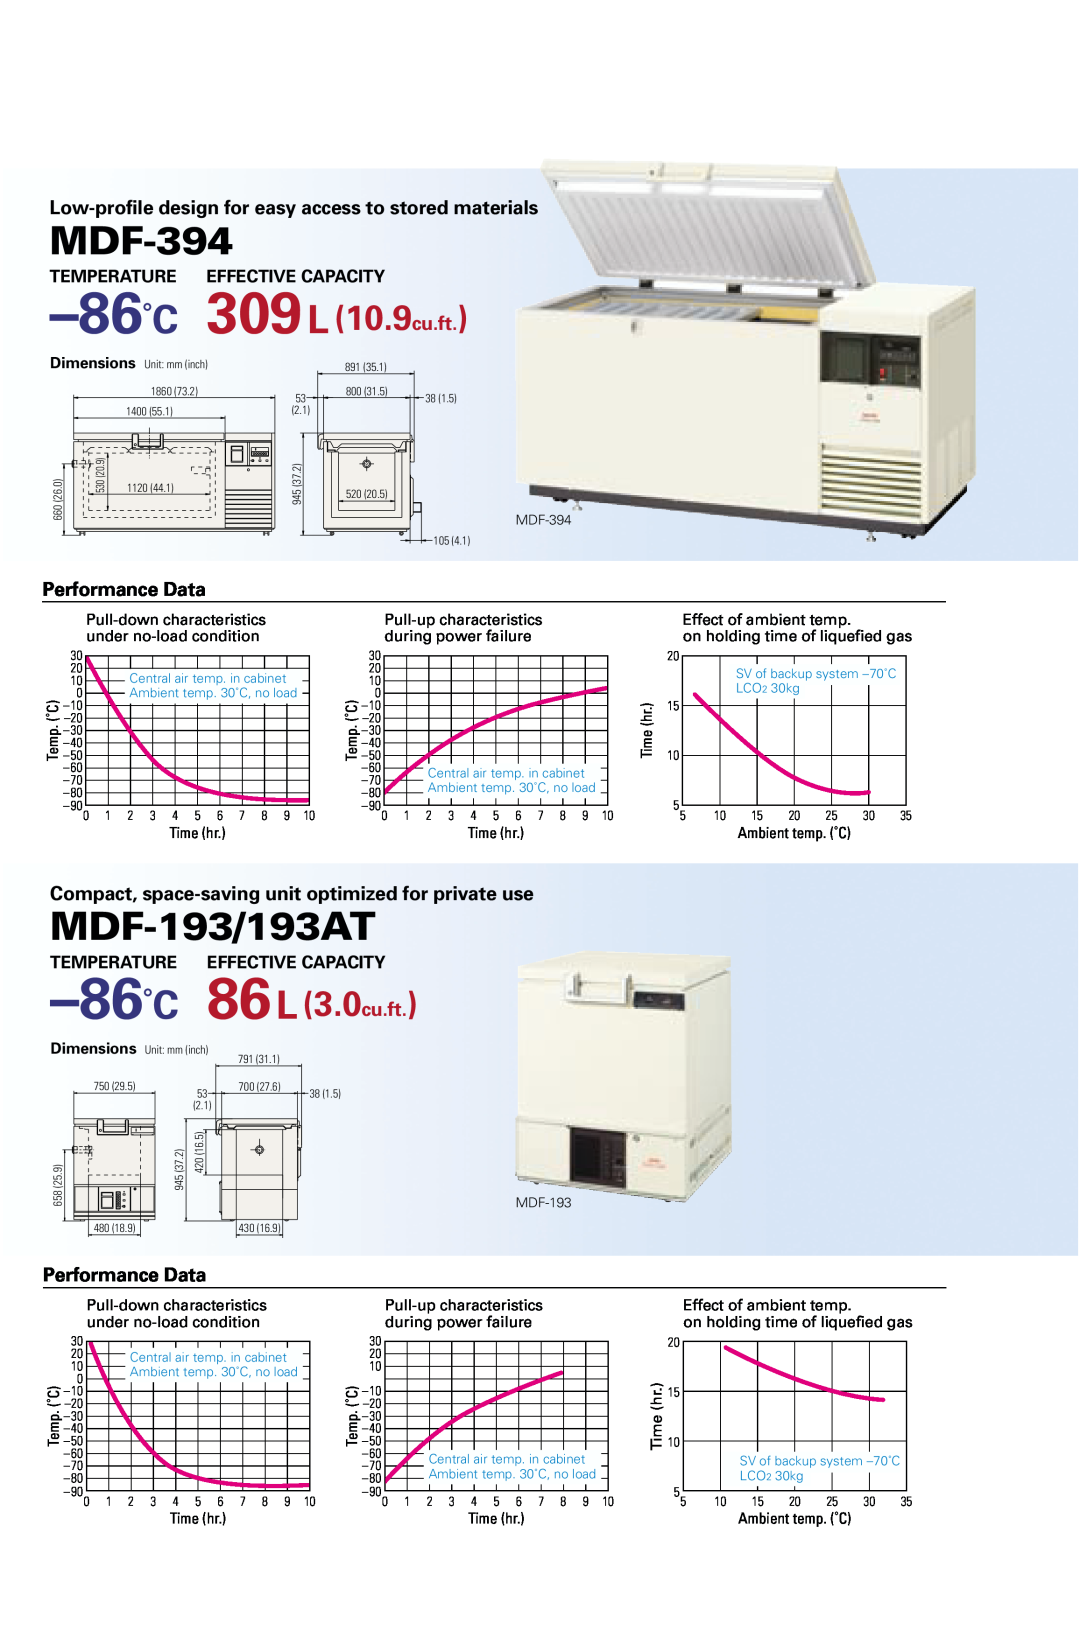 Sanyo MDF-1156 MDF-394, MDF-193/193AT, 86˚C 309L 10.9cu.ft, 86˚C 86L 3.0cu.ft, Performance Data, Time hr, Ambient temp. ˚C 